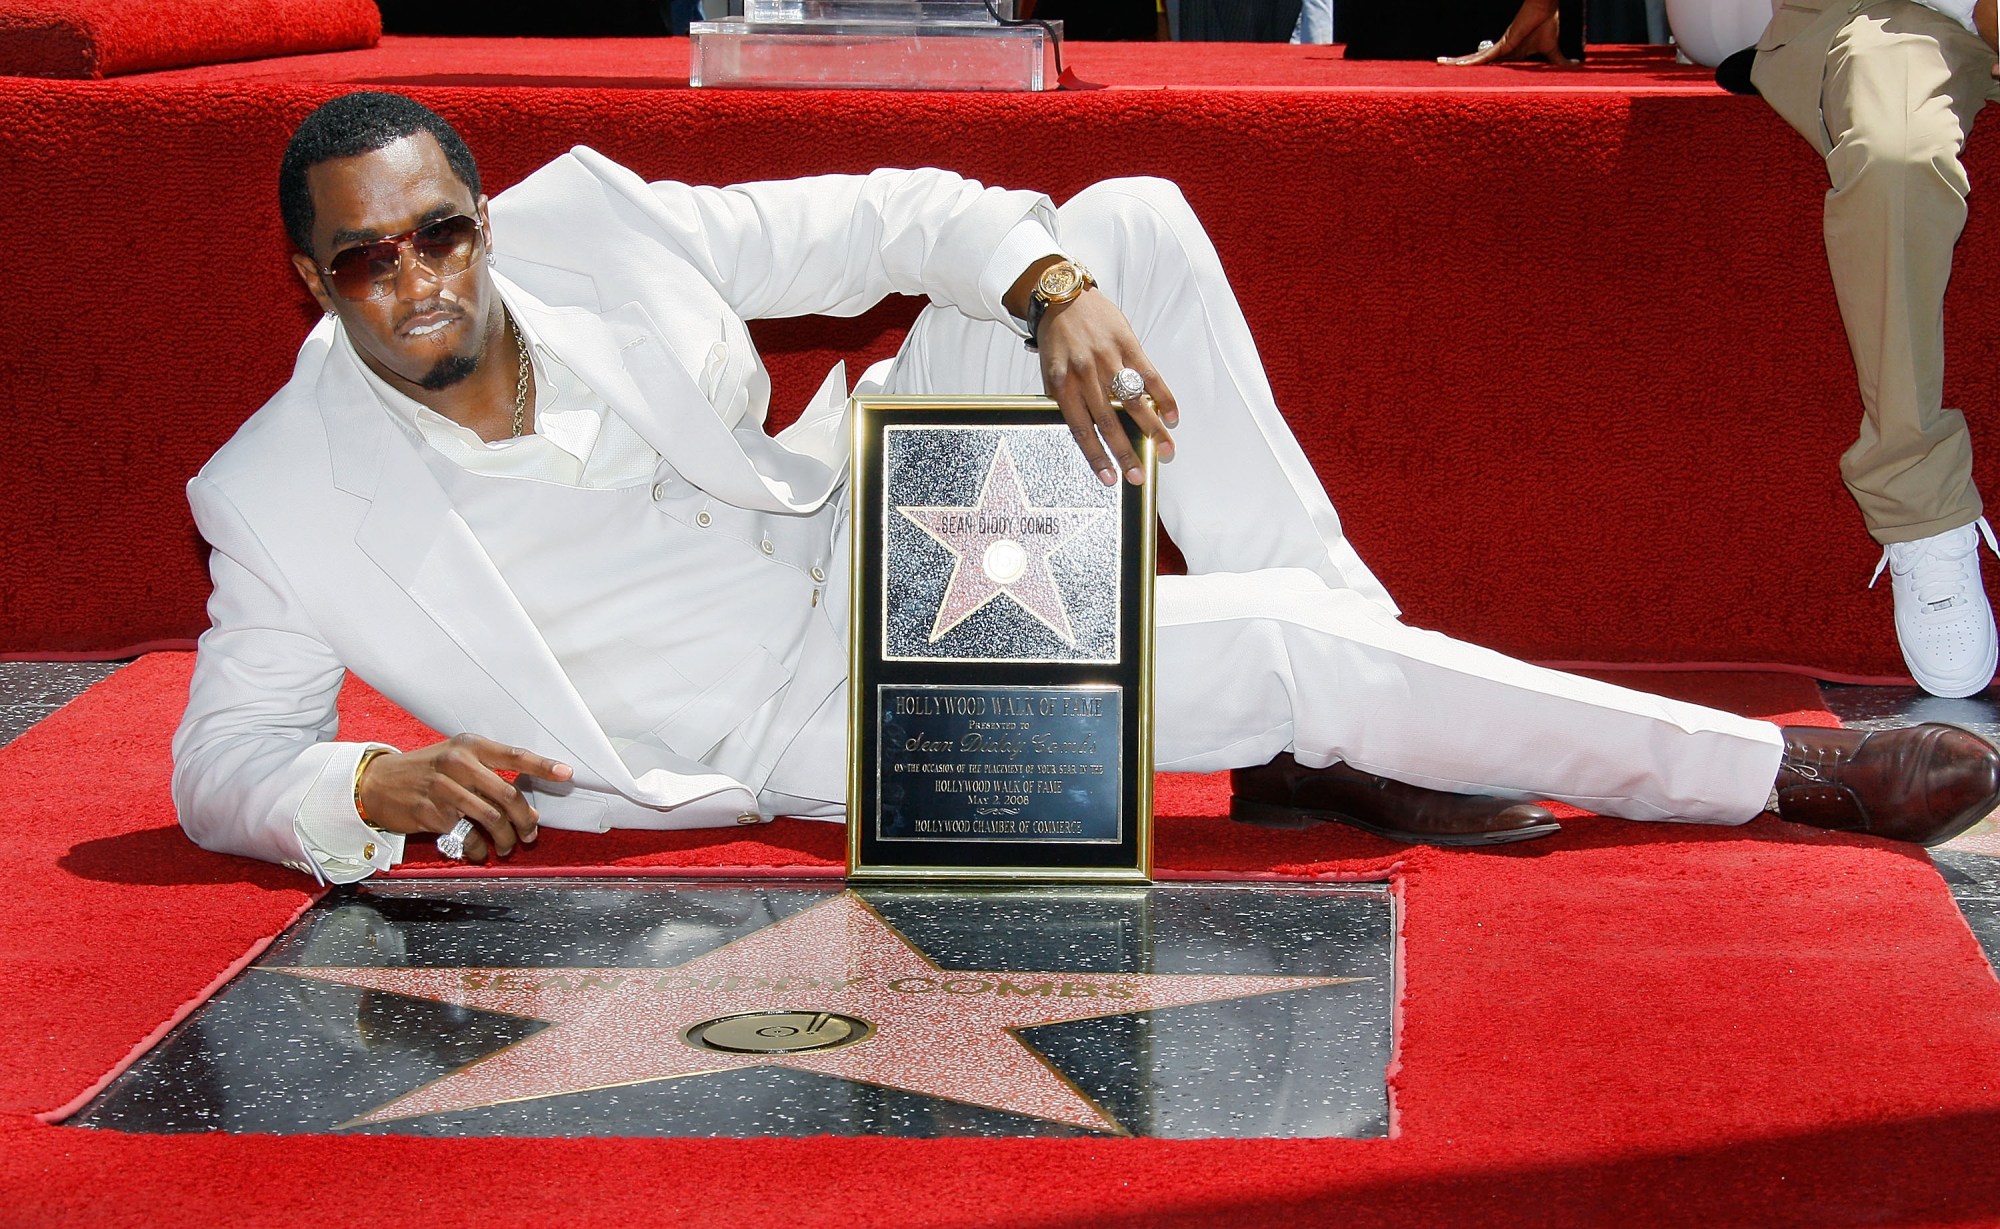 Hollywood Chamber of Commerce Says Diddy's Star Will Stay